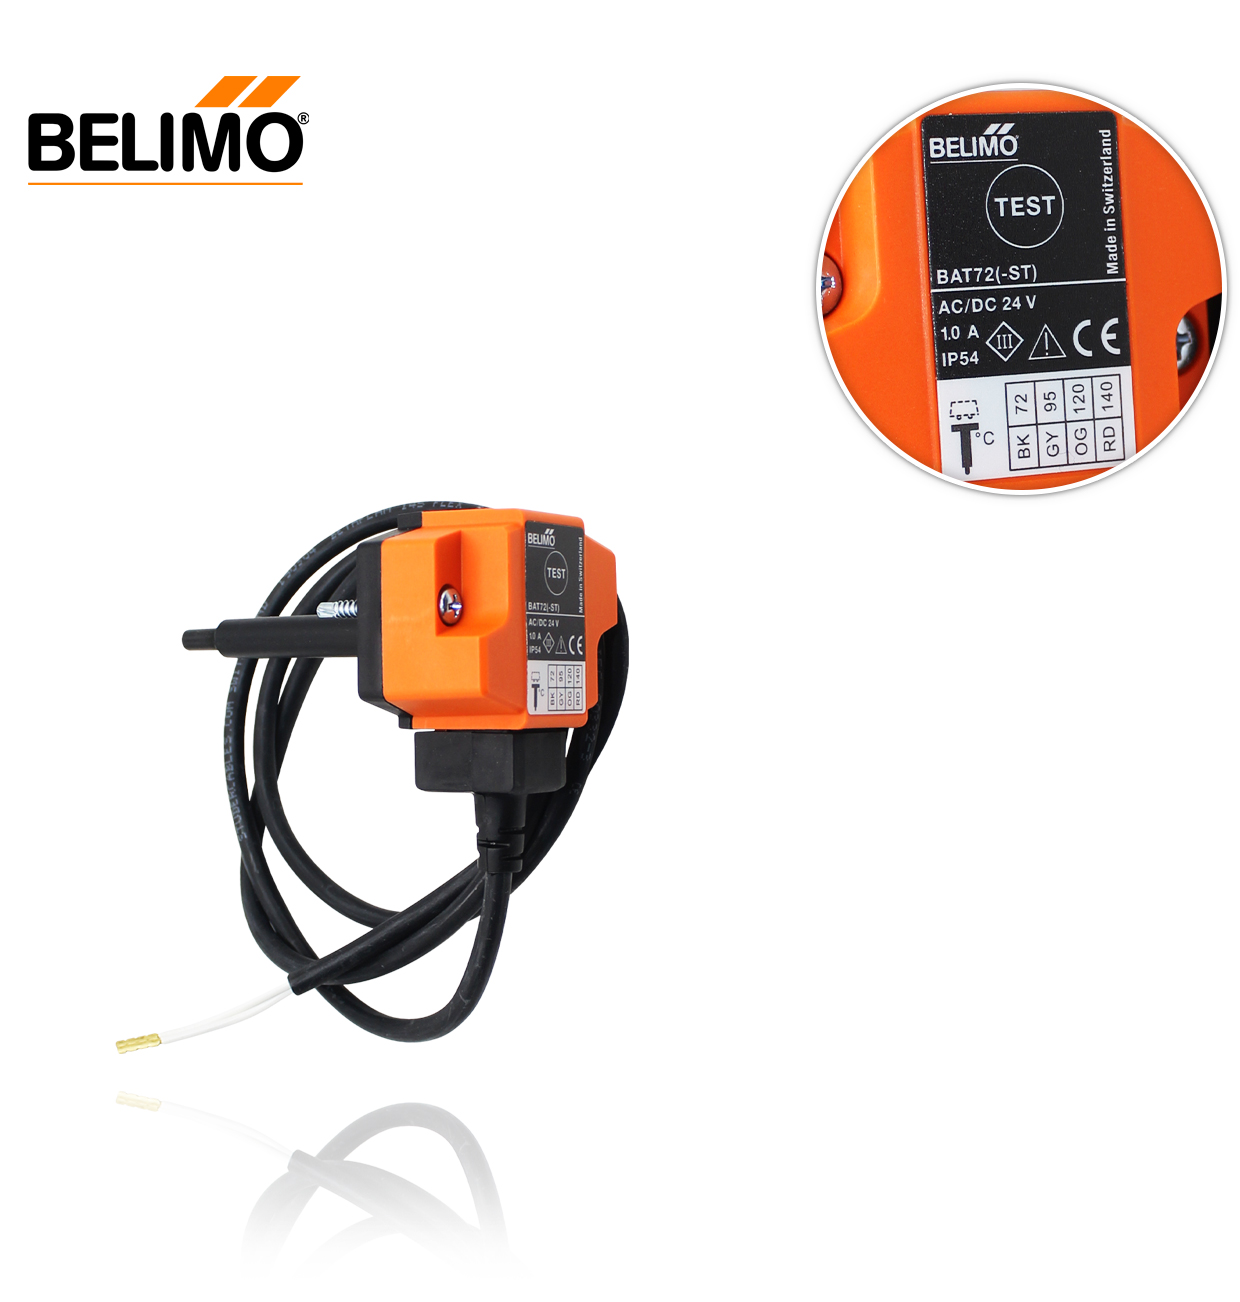 BAE72-S 24V BELIMO THERMOELECTRIC TRIPPING DEVICE with push-button